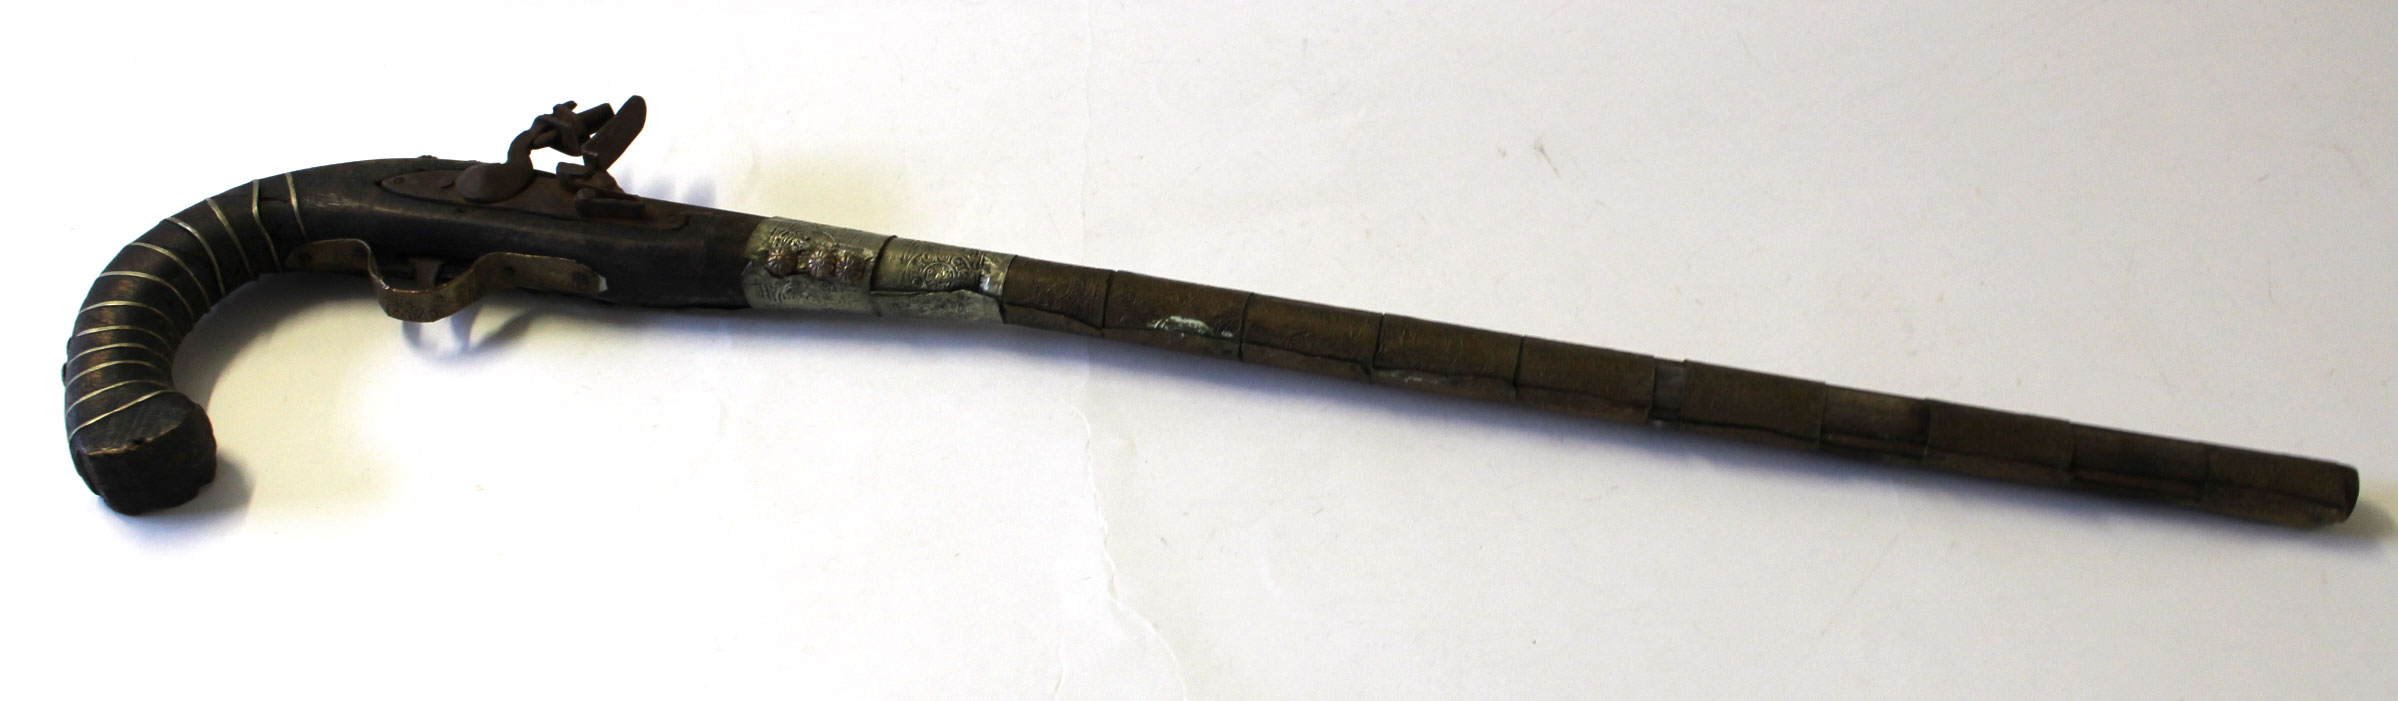 19th century decorative Far Eastern or Indian pistol, the barrel bound with impressed brass,